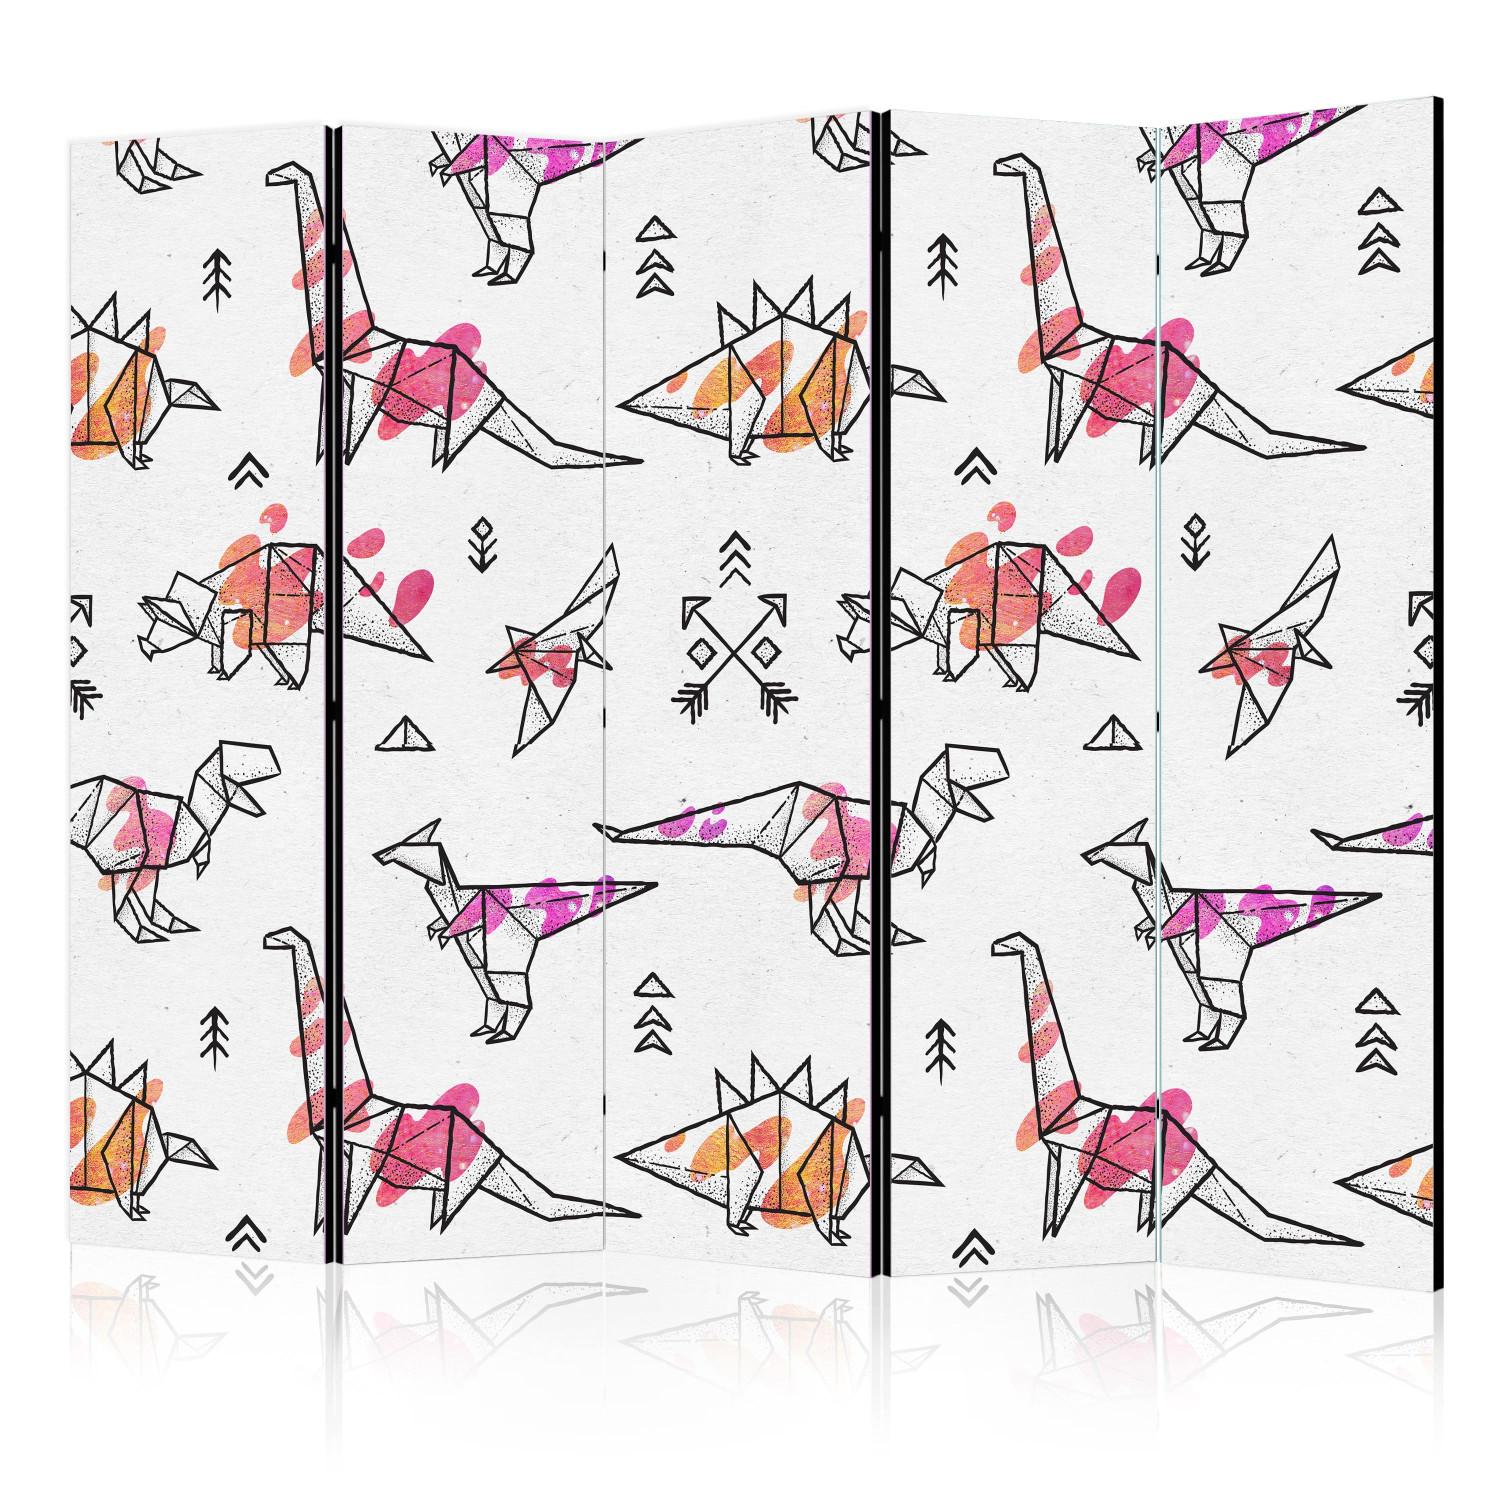 Room Divider Origami Dinosaurs II - fanciful animals with colorful filling